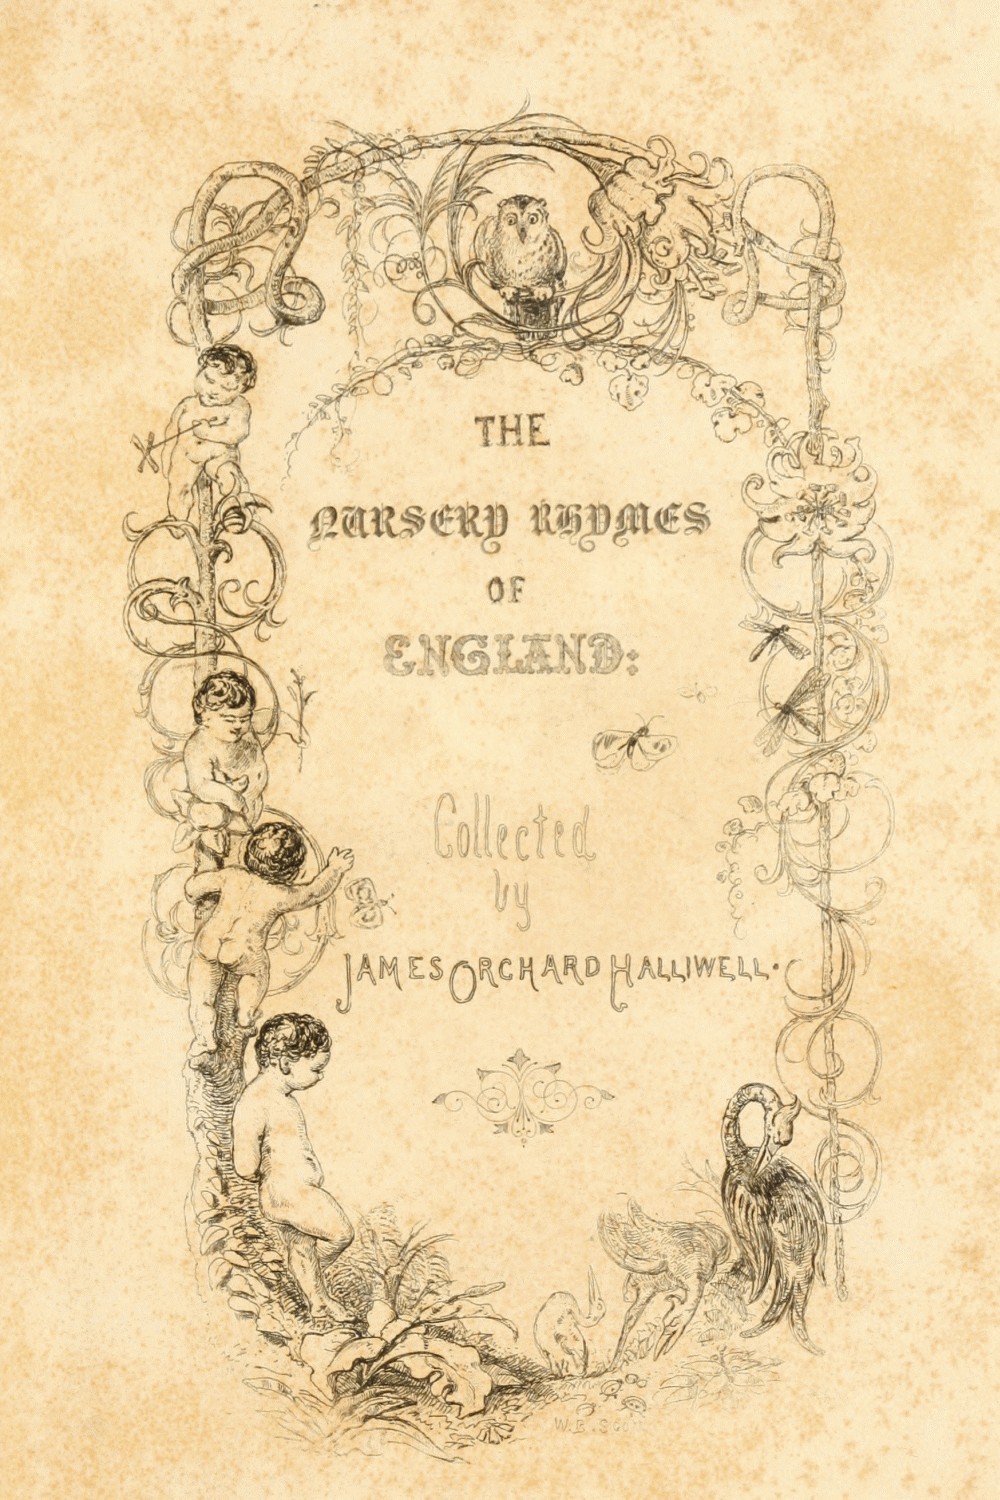 The Nursery Rhymes Of England Collected By James Orchard Halliwell